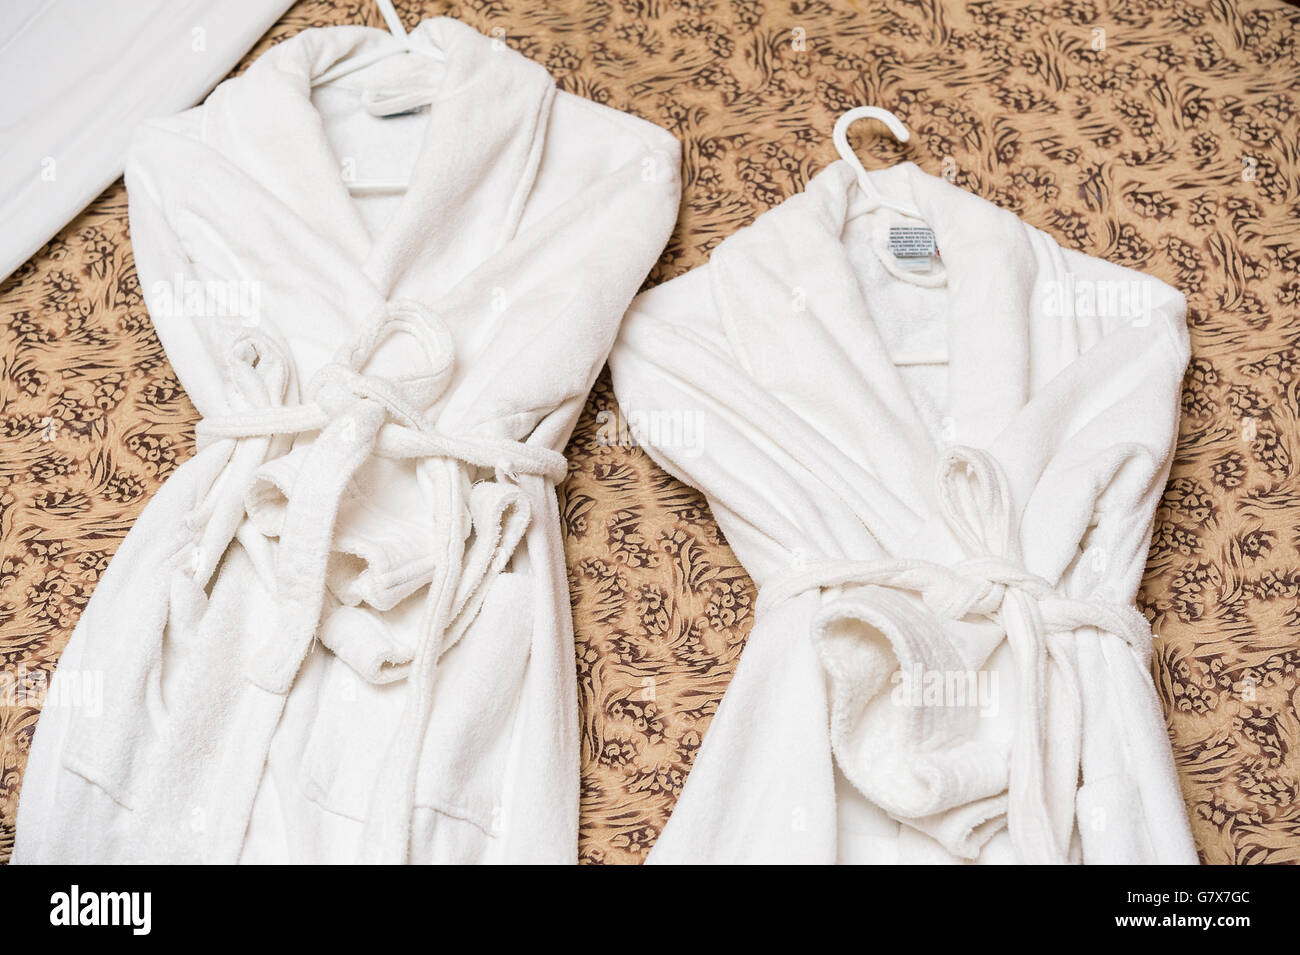 Bathing robes on hotel bed. For spa and relaxation concepts. Stock Photo